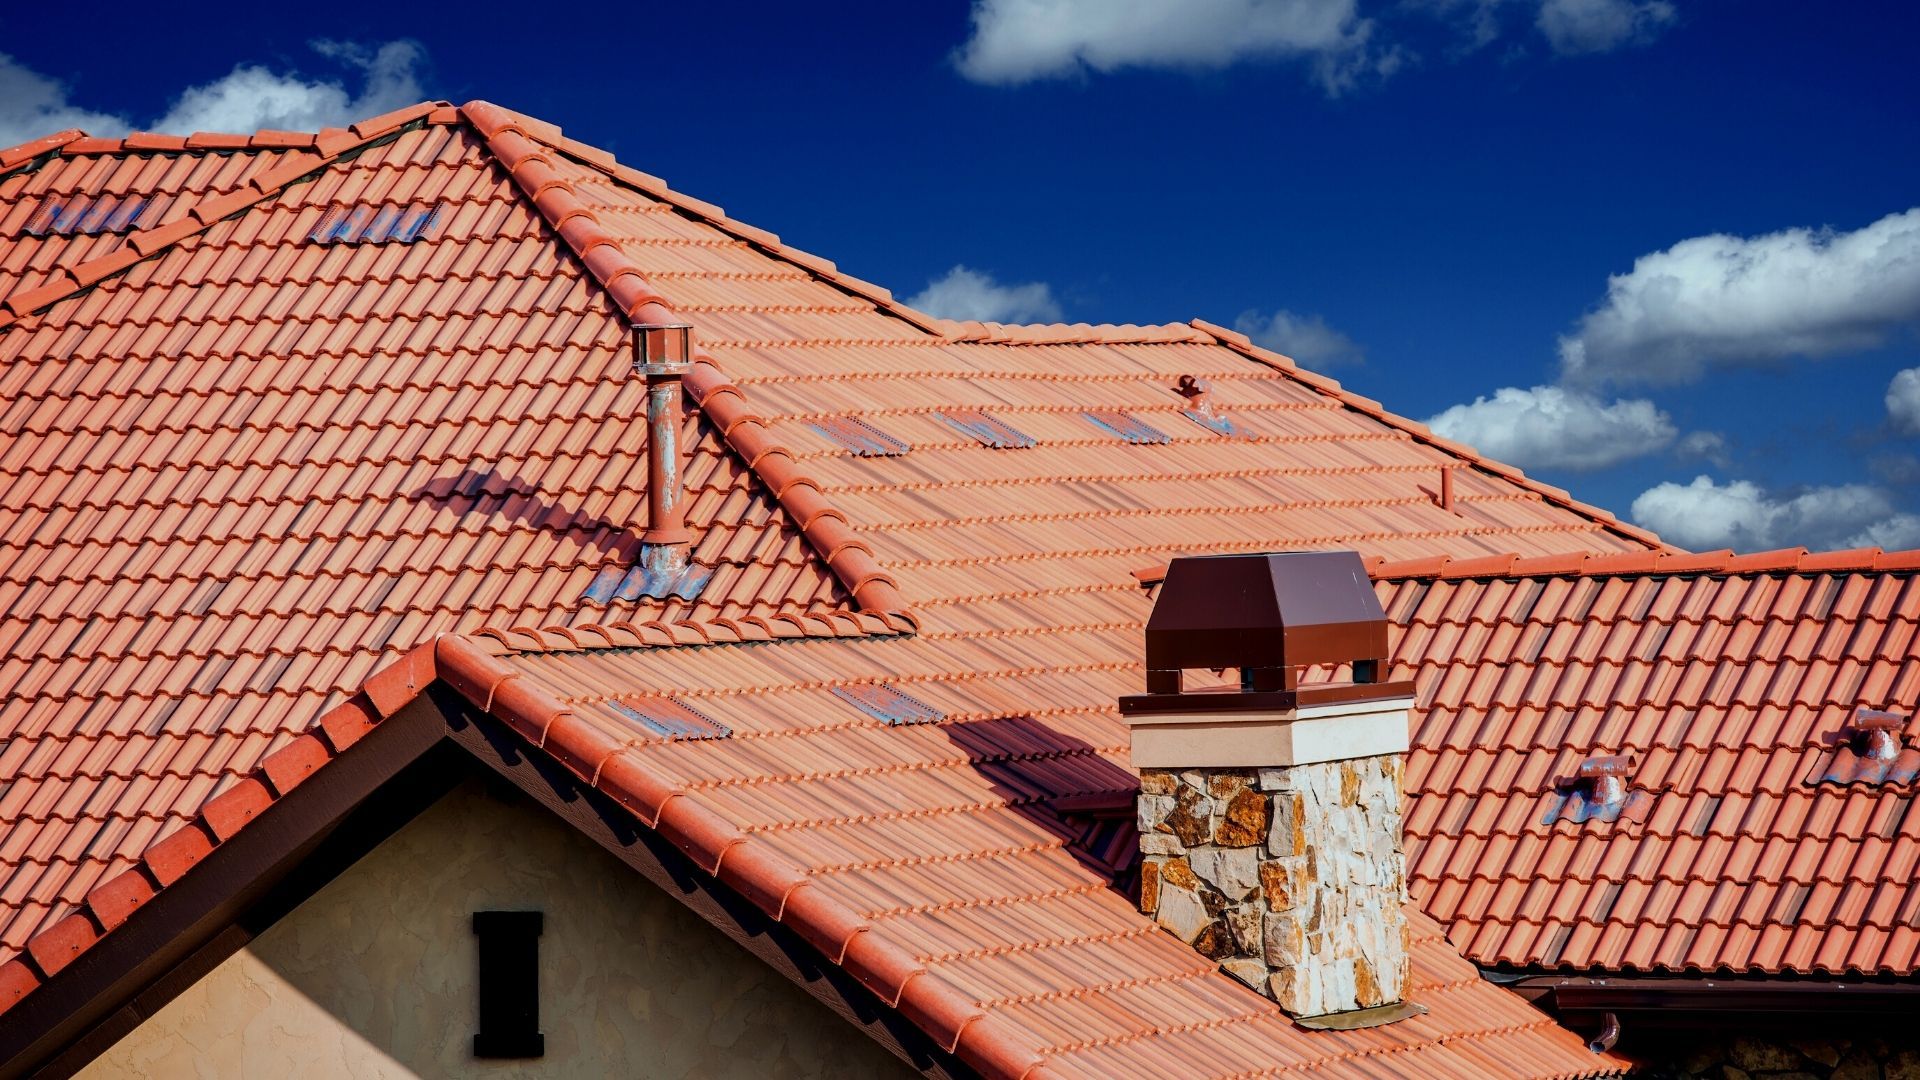 What should I look for when choosing a roofing company?